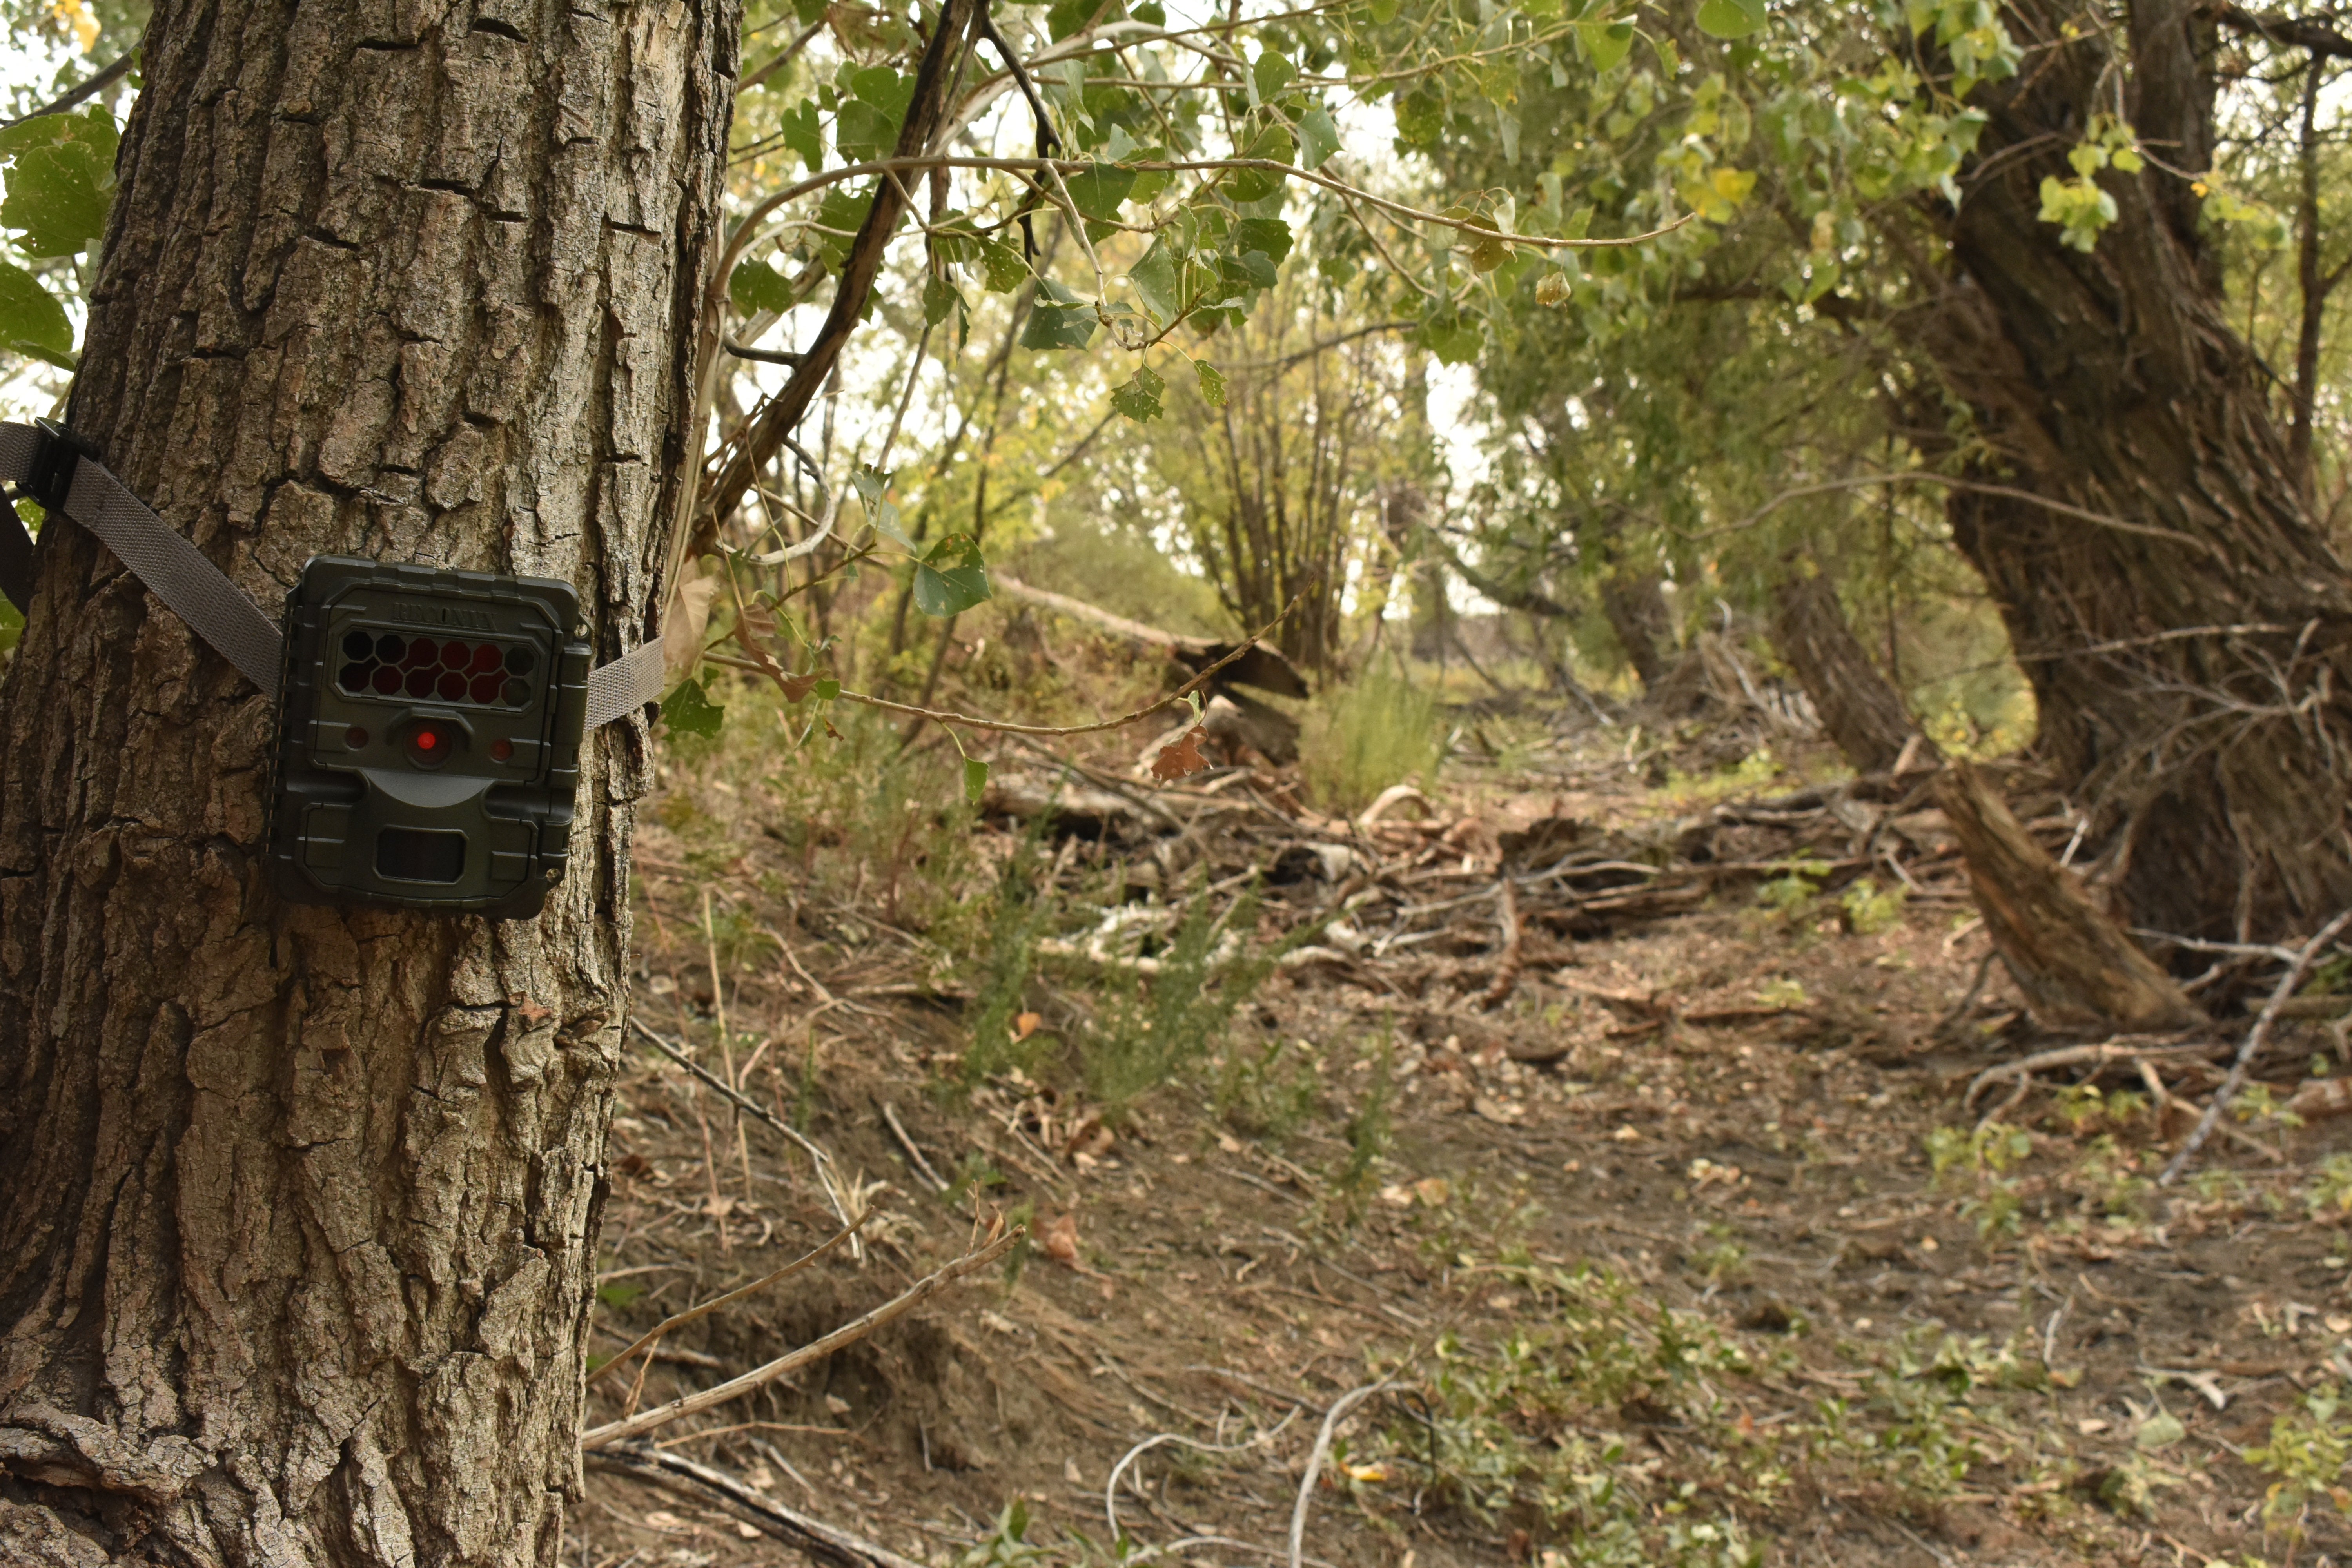 A camera trap attached to the trunk of a tree in an area with trees and shrubs in the Northern Great Plains